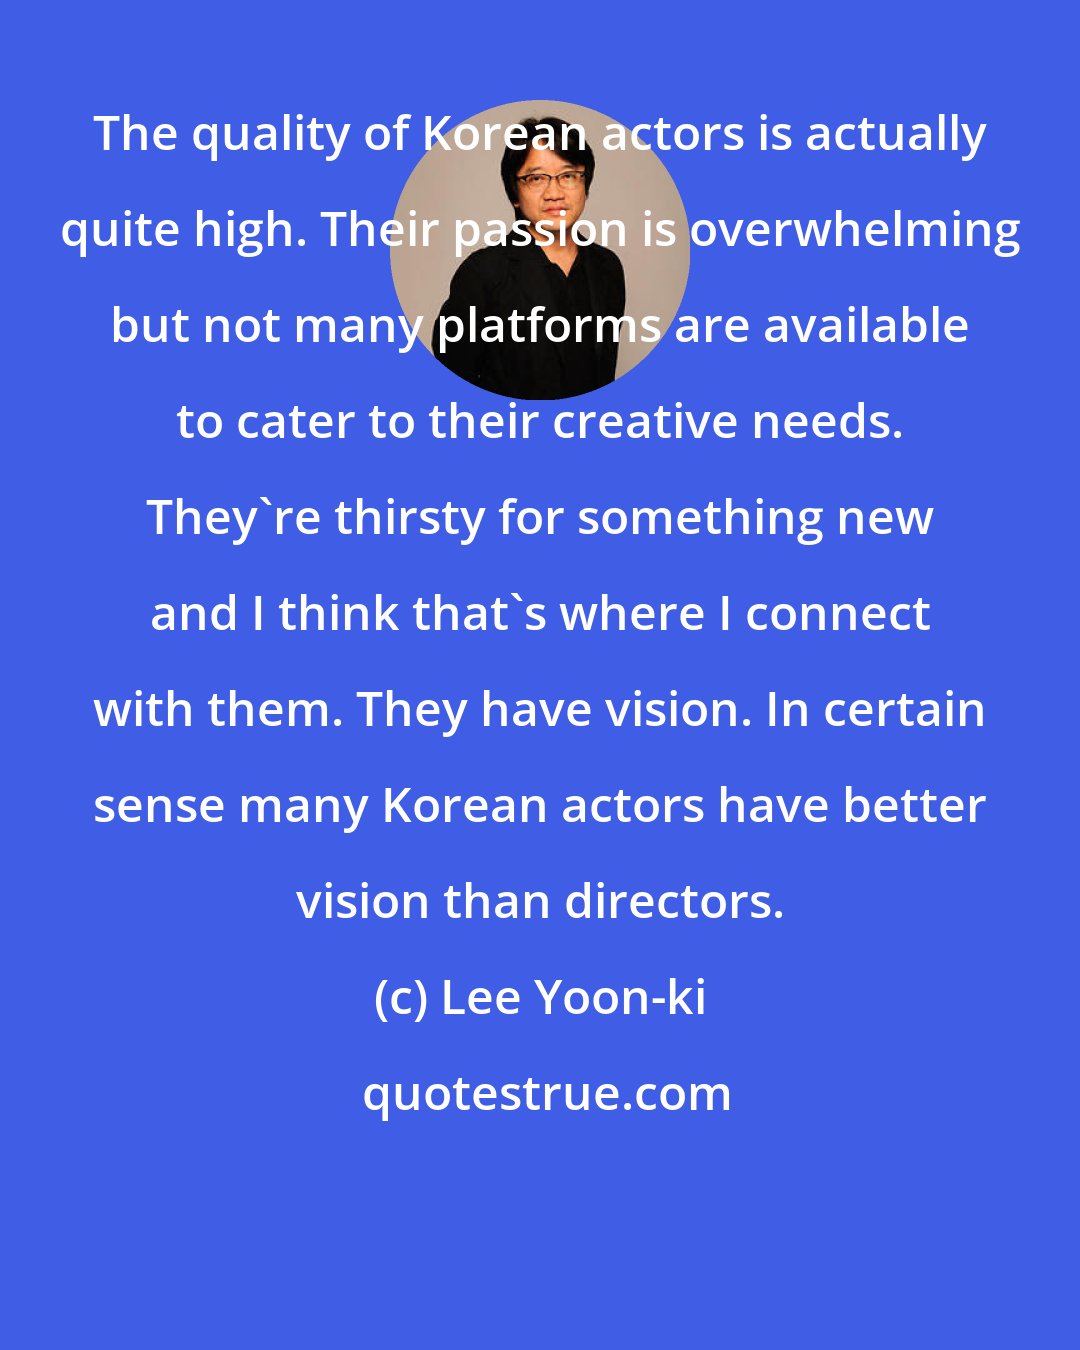 Lee Yoon-ki: The quality of Korean actors is actually quite high. Their passion is overwhelming but not many platforms are available to cater to their creative needs. They're thirsty for something new and I think that's where I connect with them. They have vision. In certain sense many Korean actors have better vision than directors.